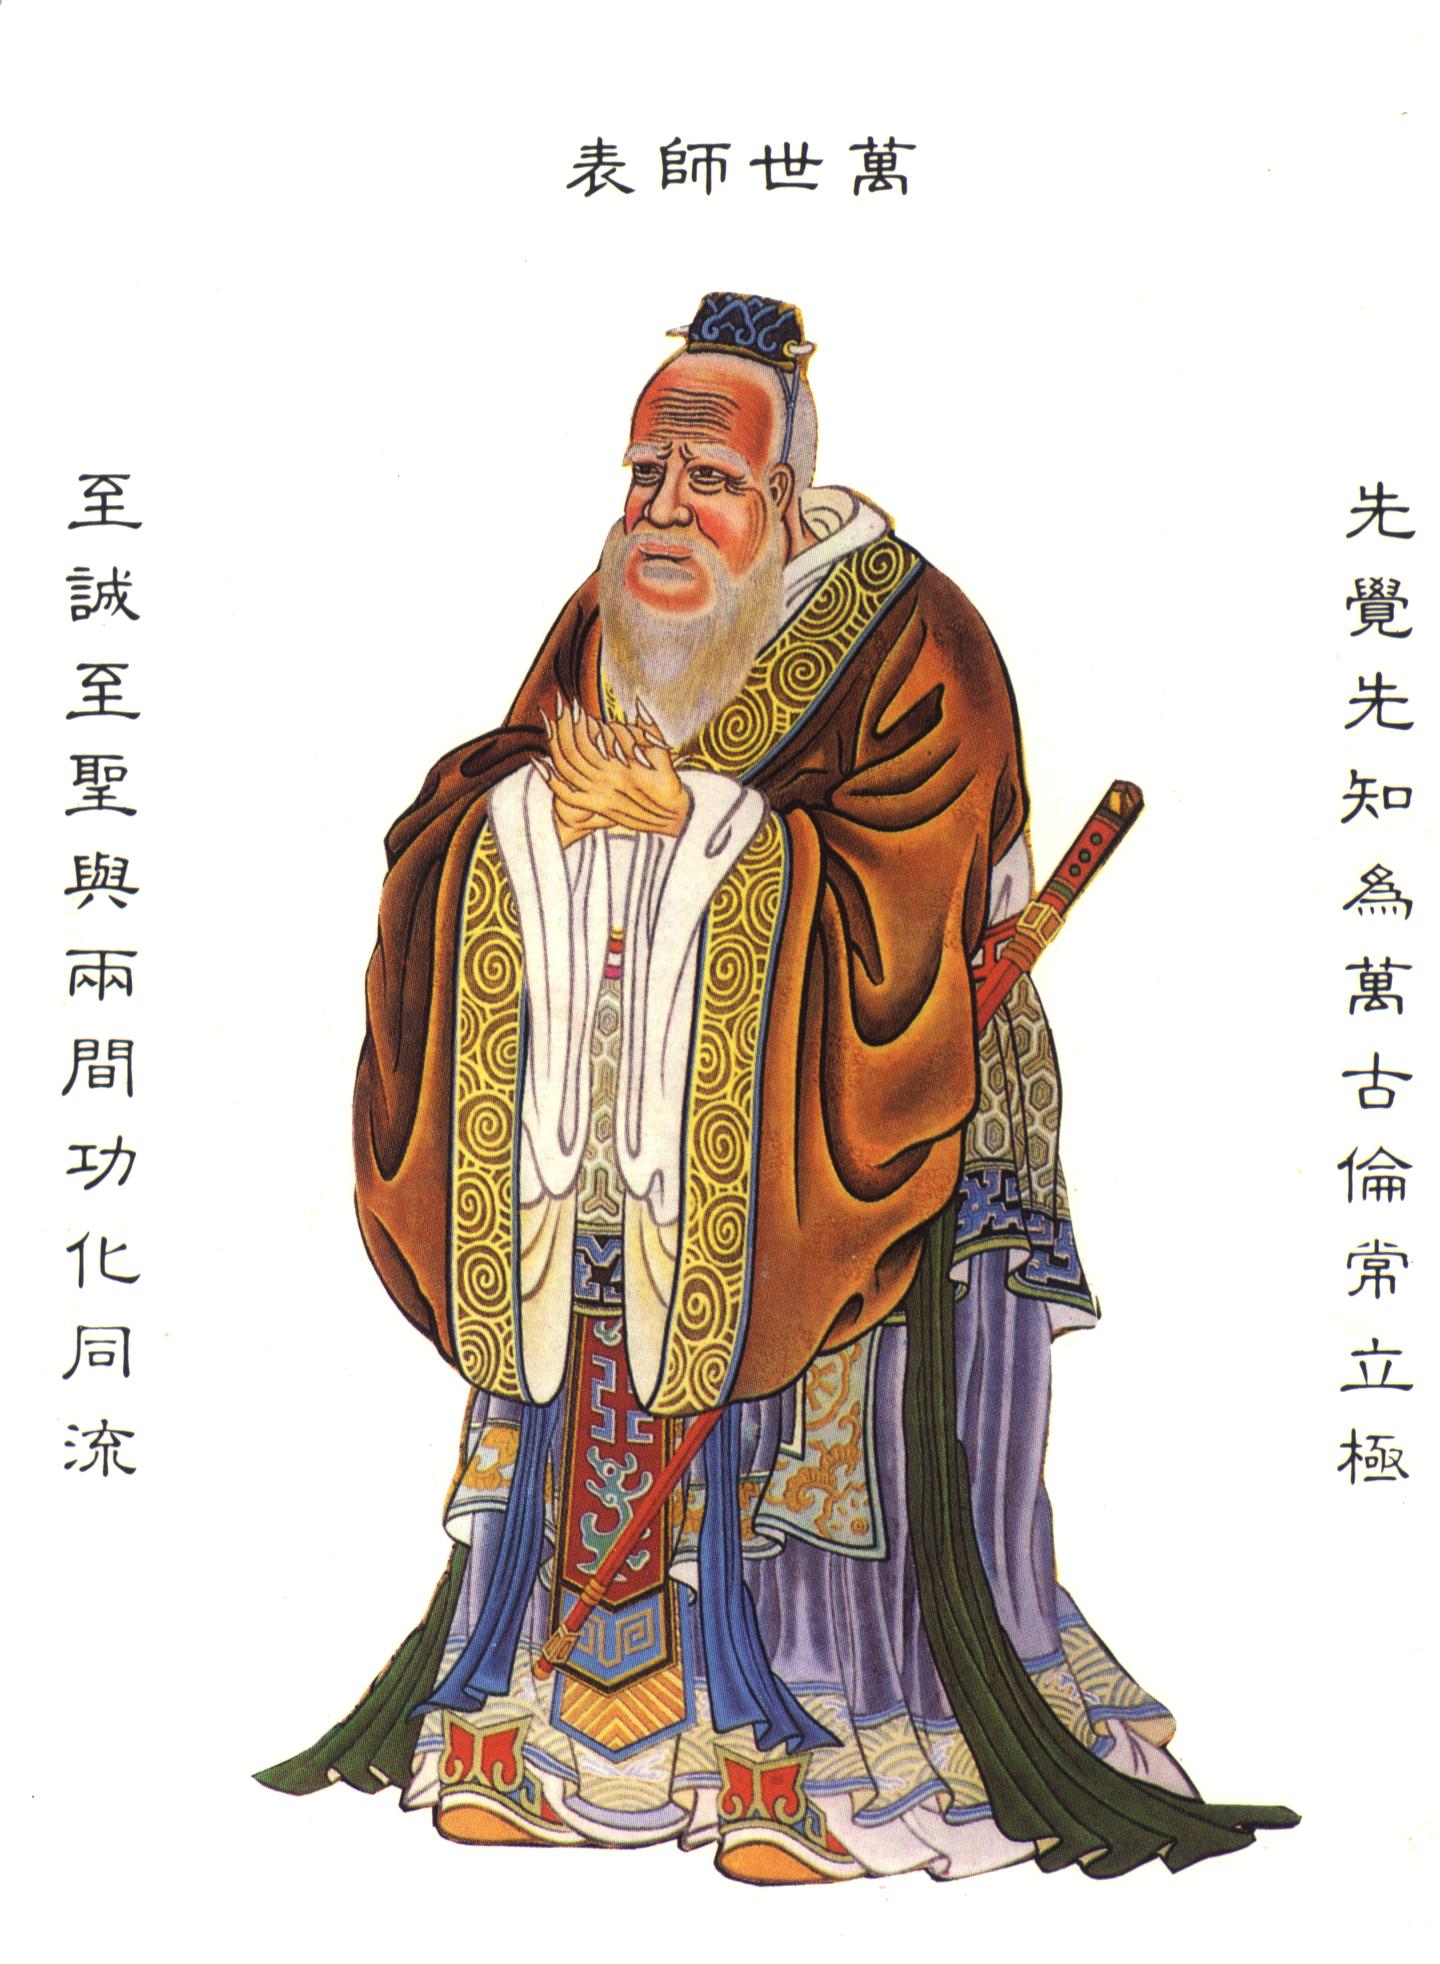 An image of Confucius.